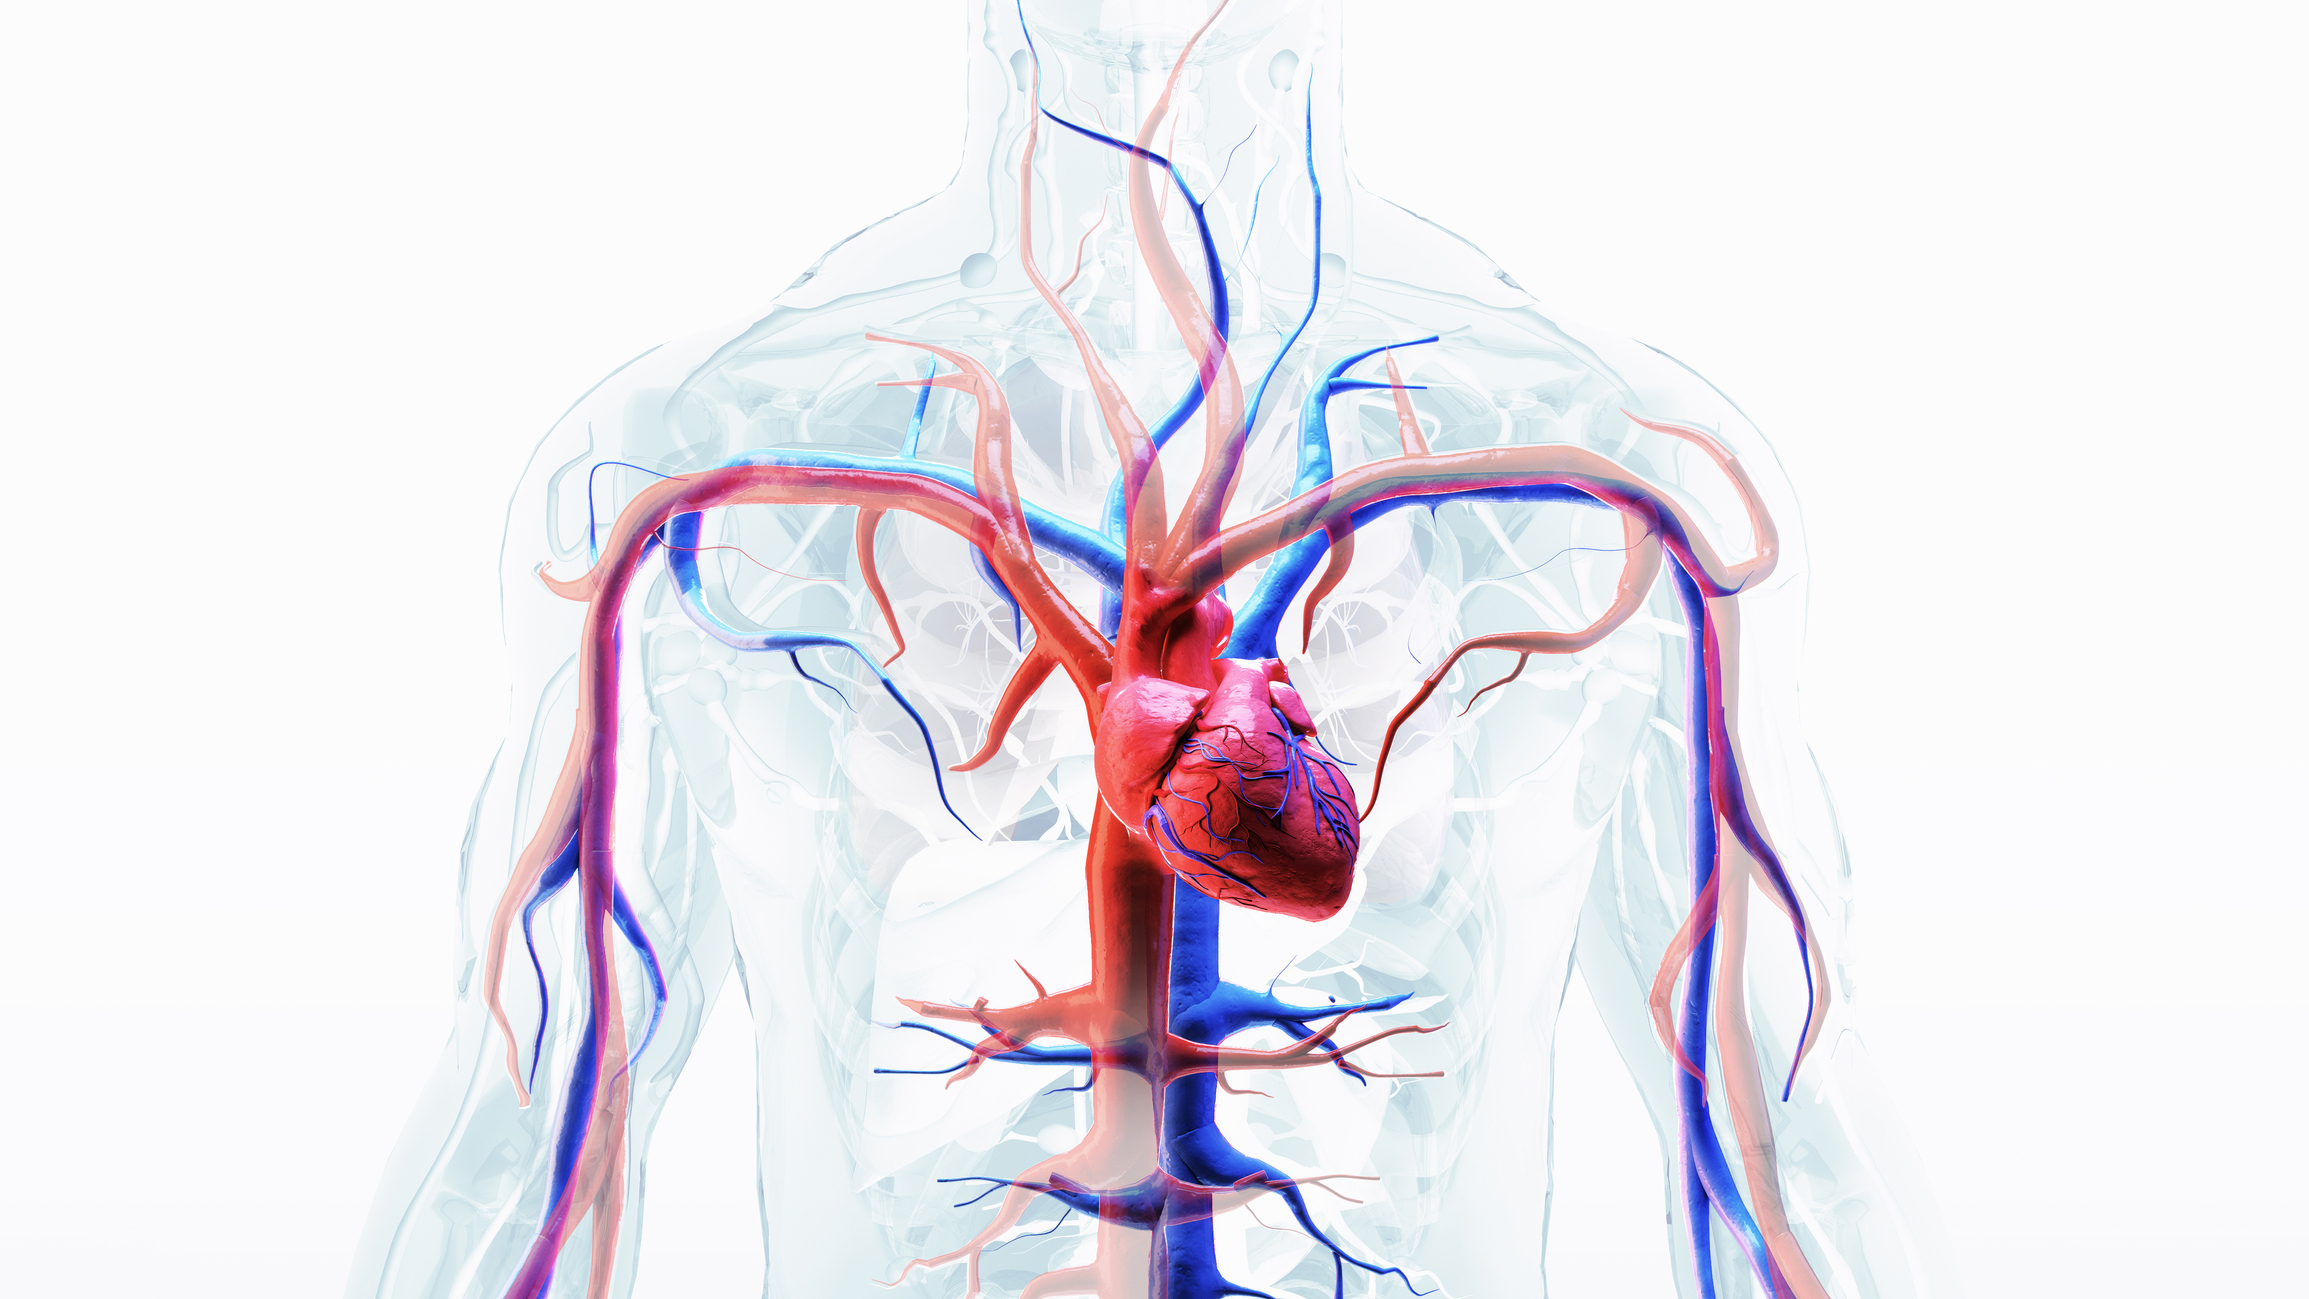 Understanding the concept of vessel health and preservation - Human body with heart and cardiovascular circulatory